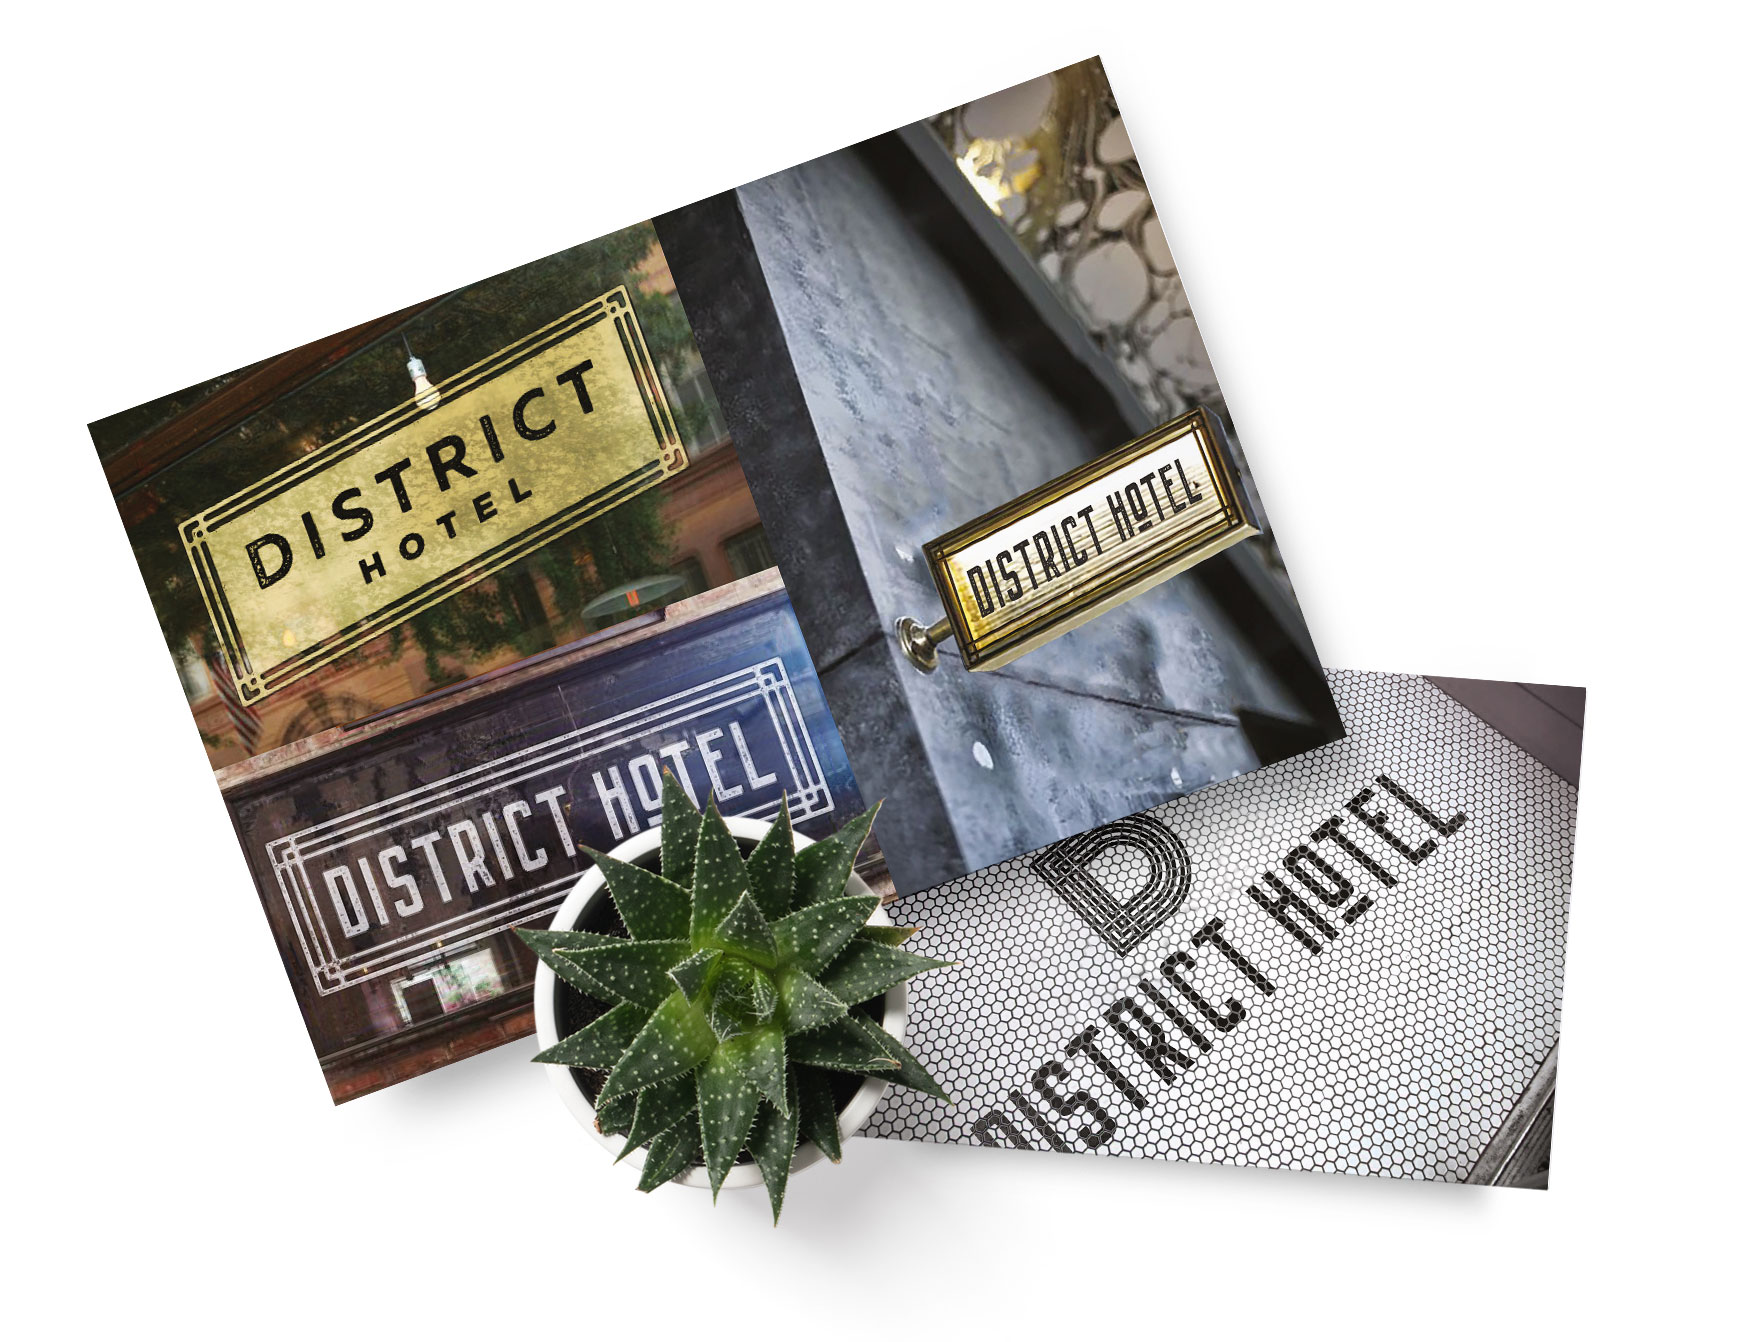 District Hotel Logo on tiled ground